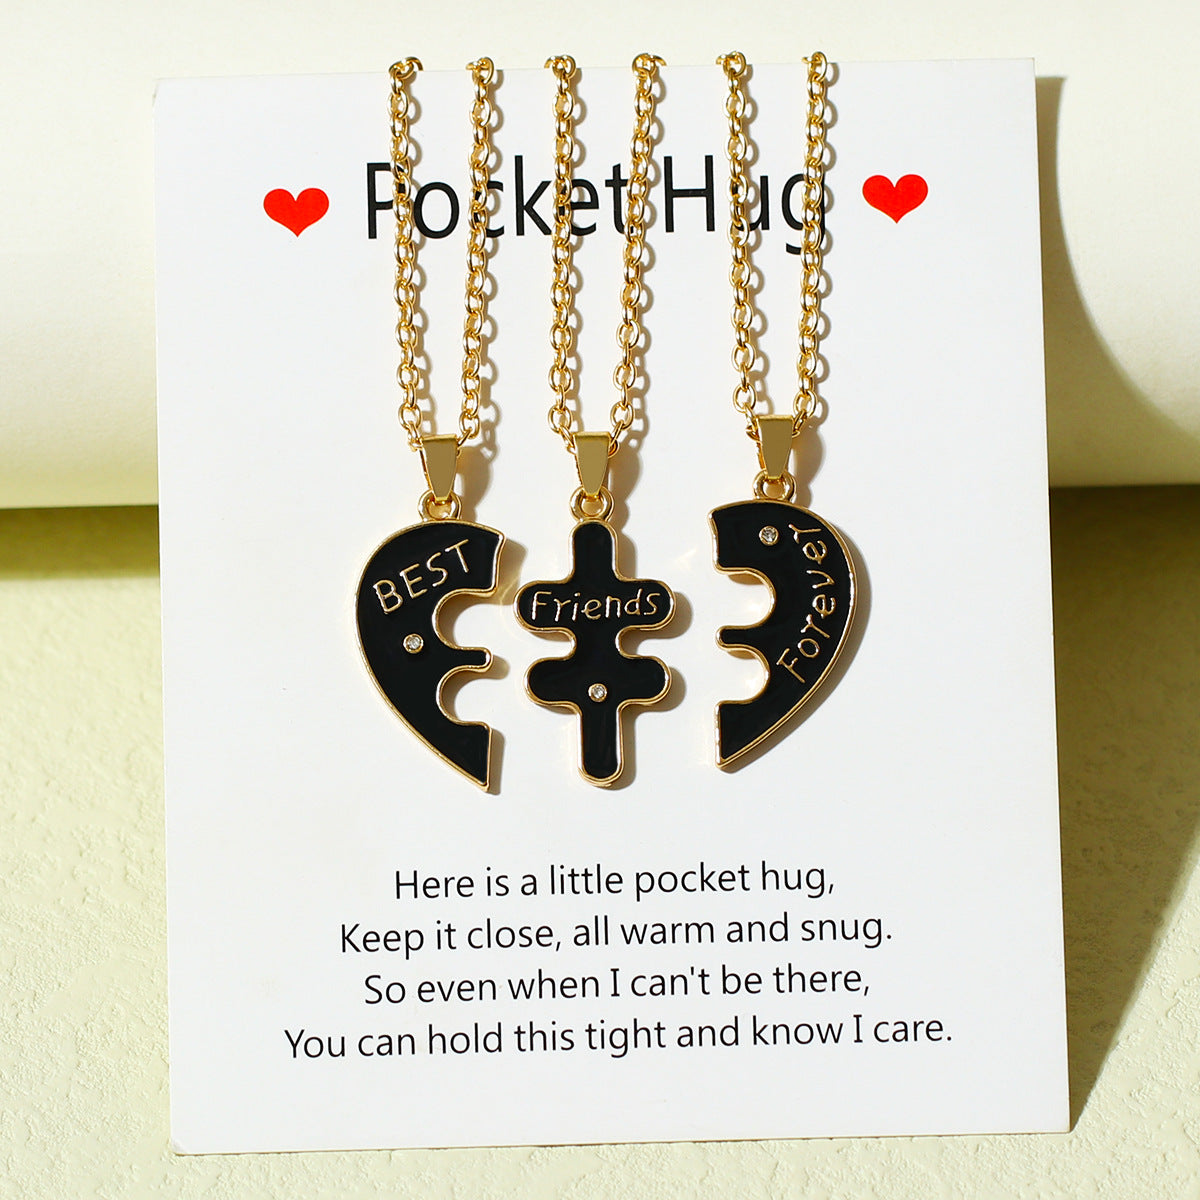 Best Friends Forever Necklaces Set for Three